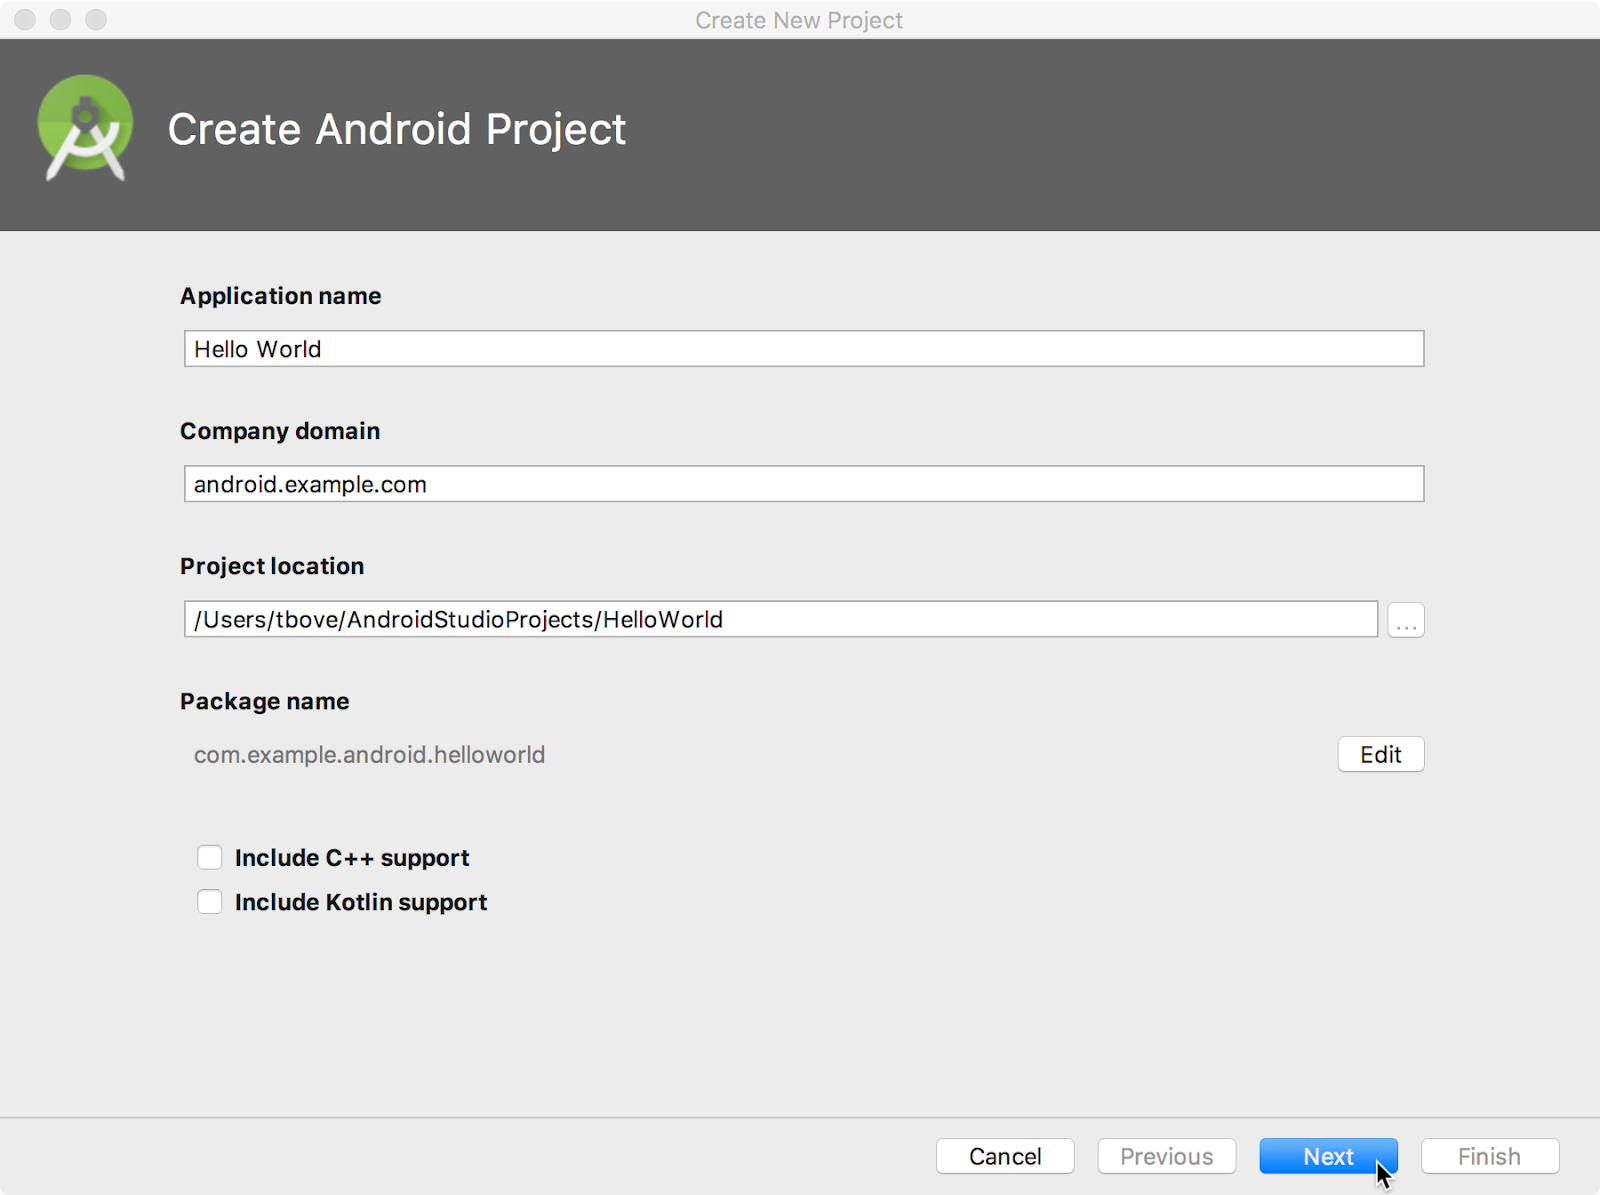  Creating an Android project